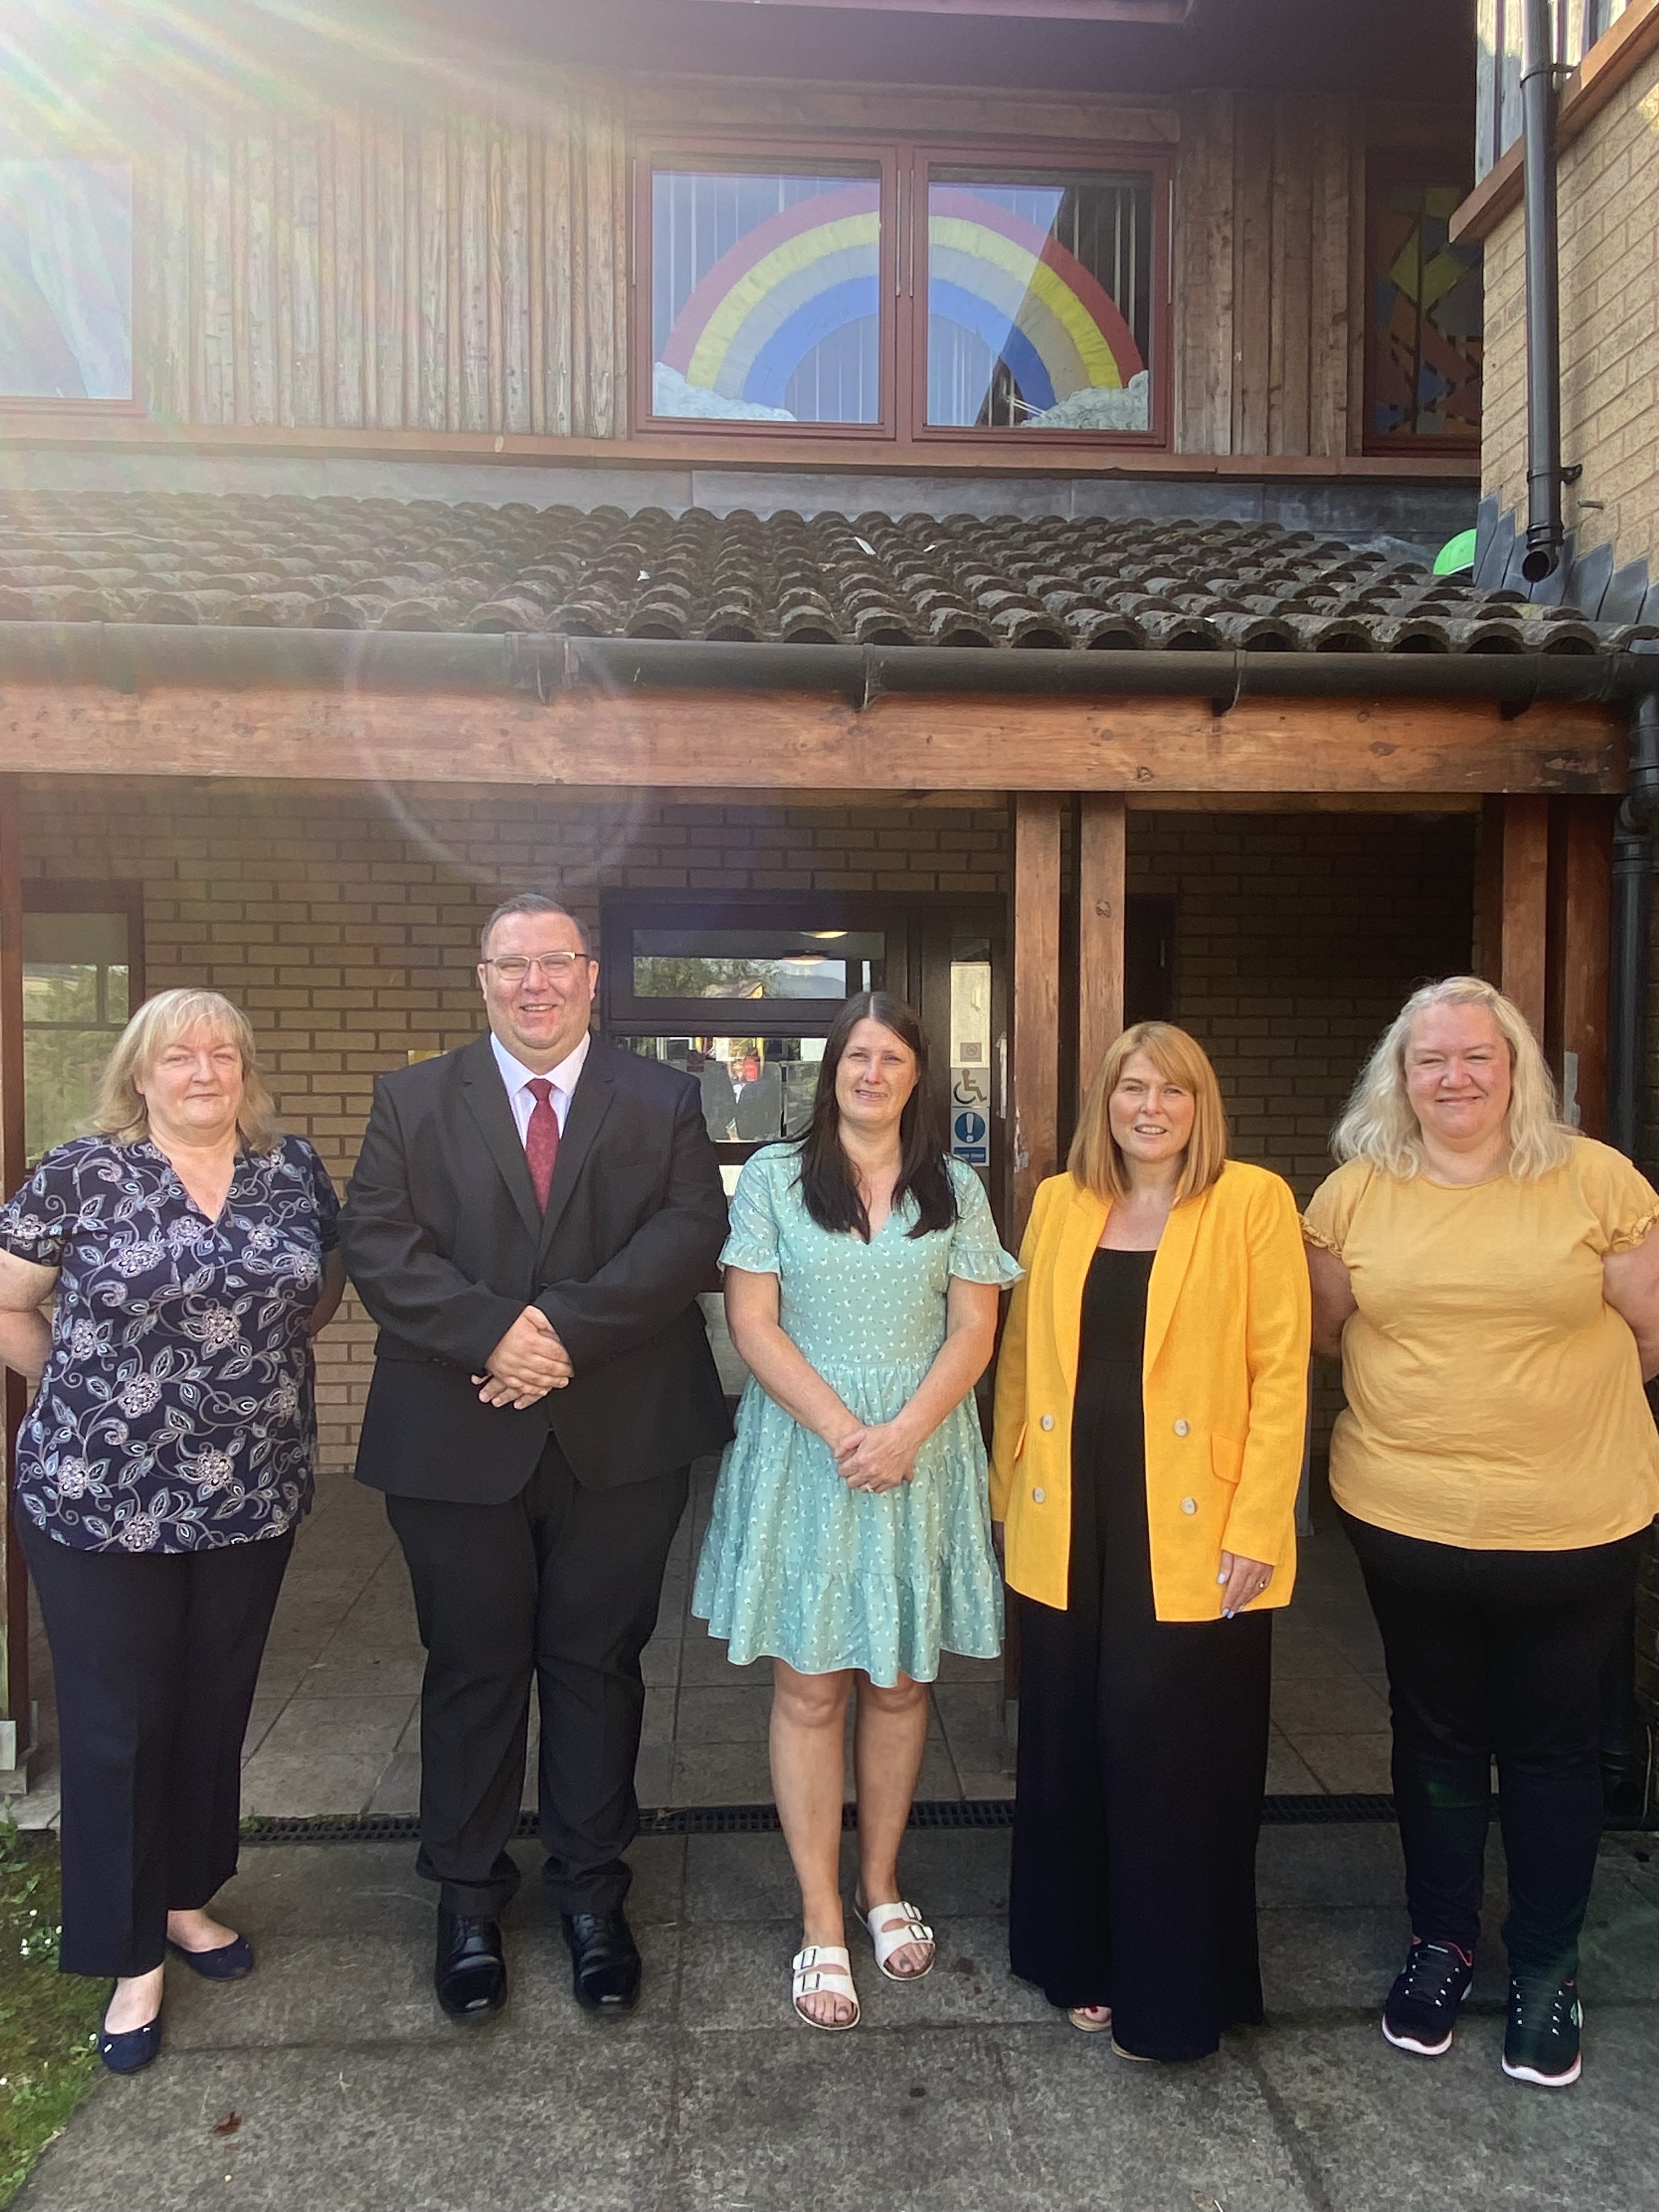 Councillors and staff at the crisis services for women